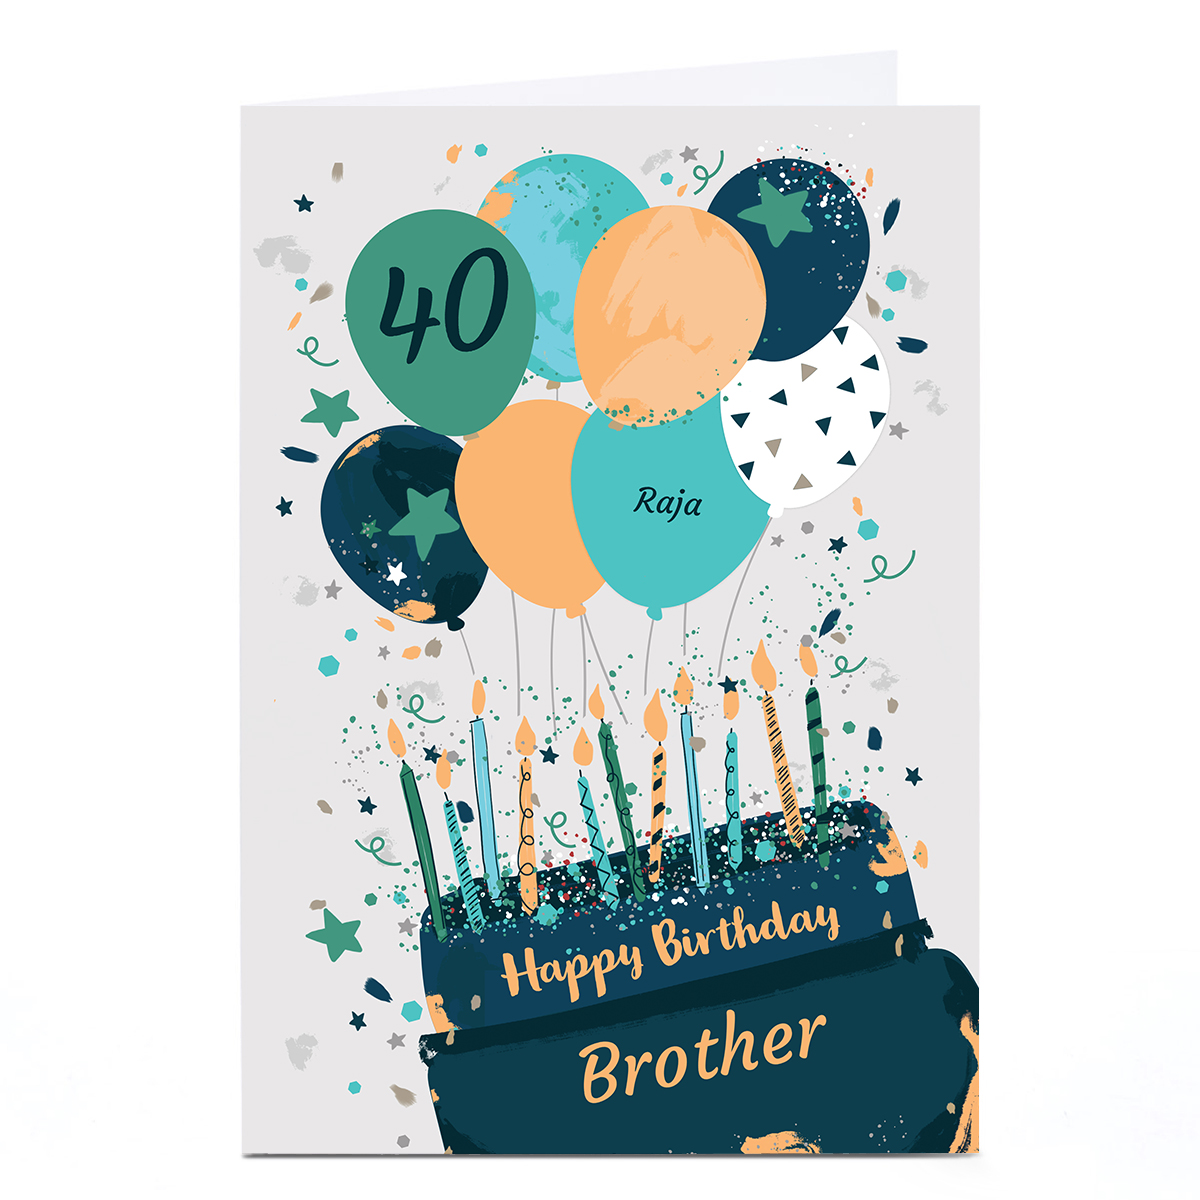 Personalised Birthday Card - Cake, Candles & Balloons, Editable Age